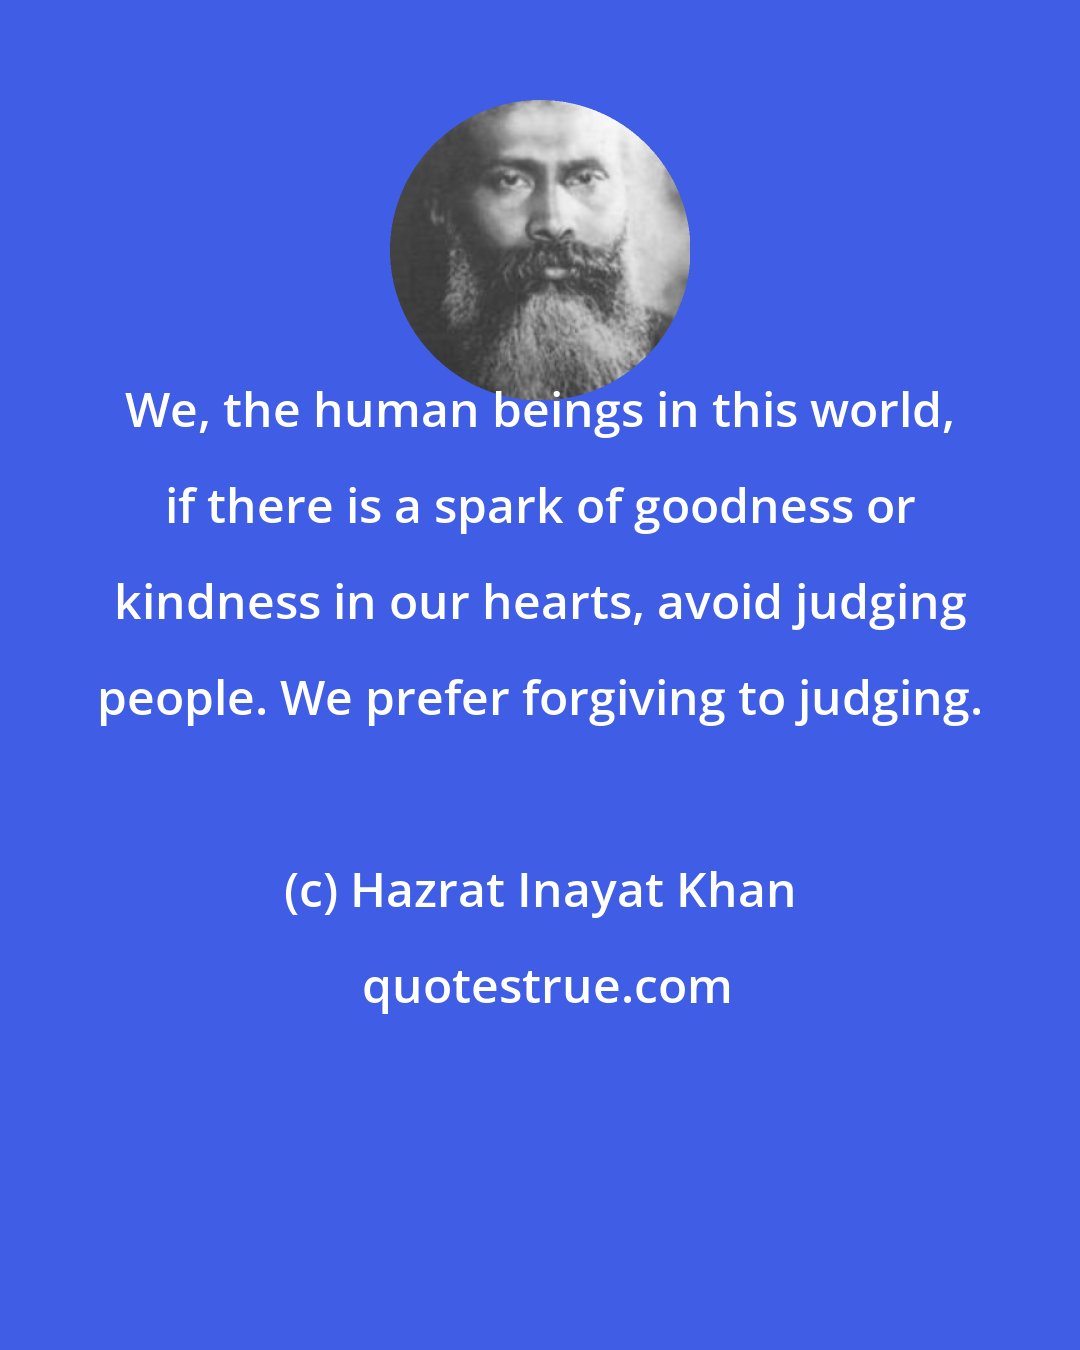 Hazrat Inayat Khan: We, the human beings in this world, if there is a spark of goodness or kindness in our hearts, avoid judging people. We prefer forgiving to judging.